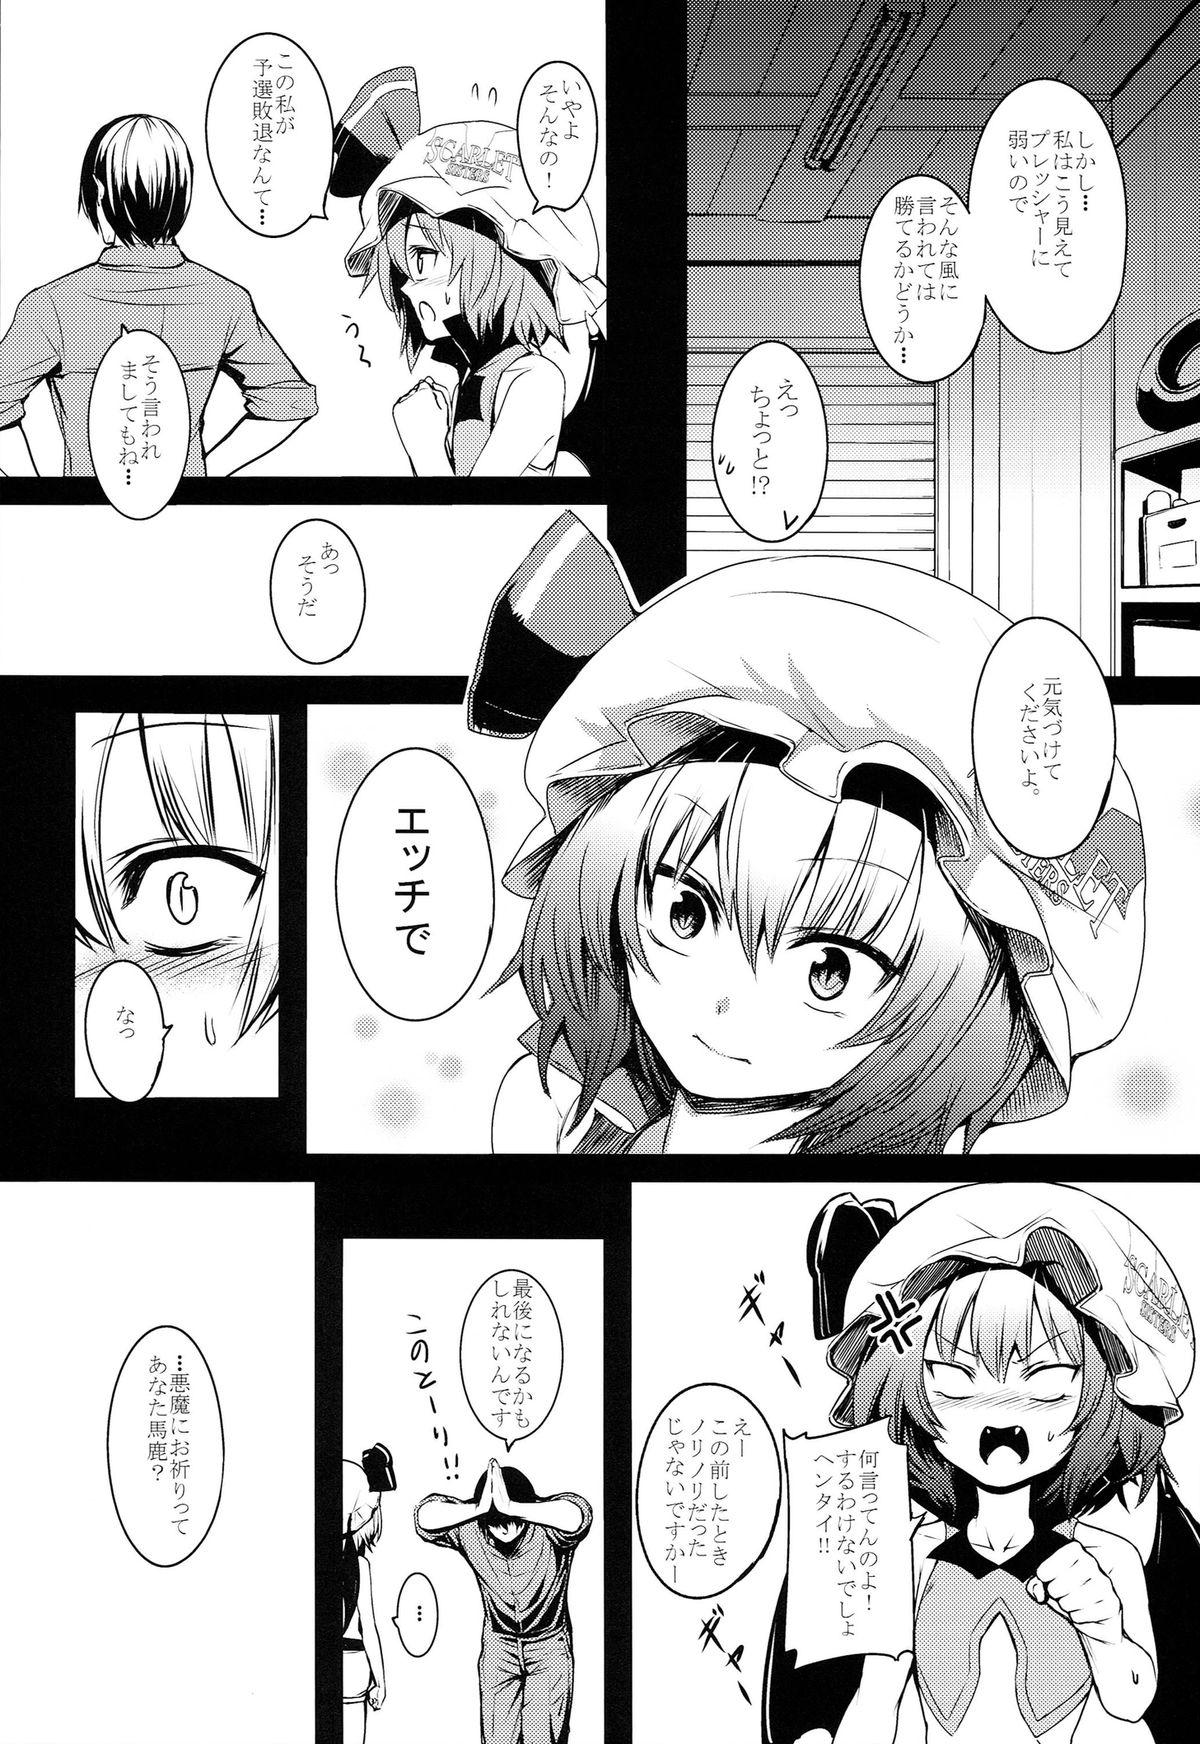 Movies TOUHOU RACE QUEENS COLLABO CLUB - Touhou project The - Page 5